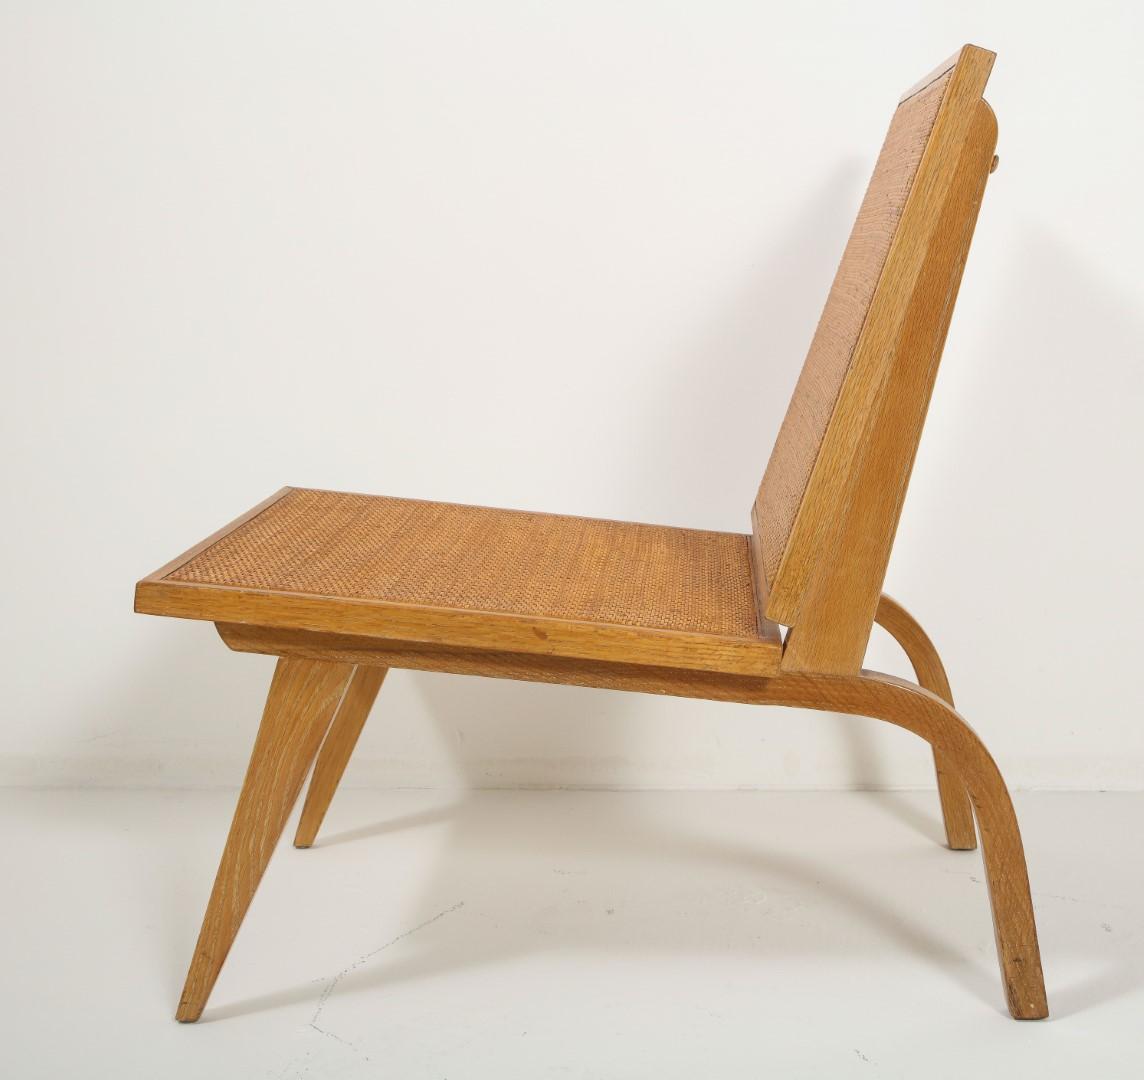 Midcentury Woven Oak Lounge Chair by Edward Durell Stone for Fulbright For Sale 10